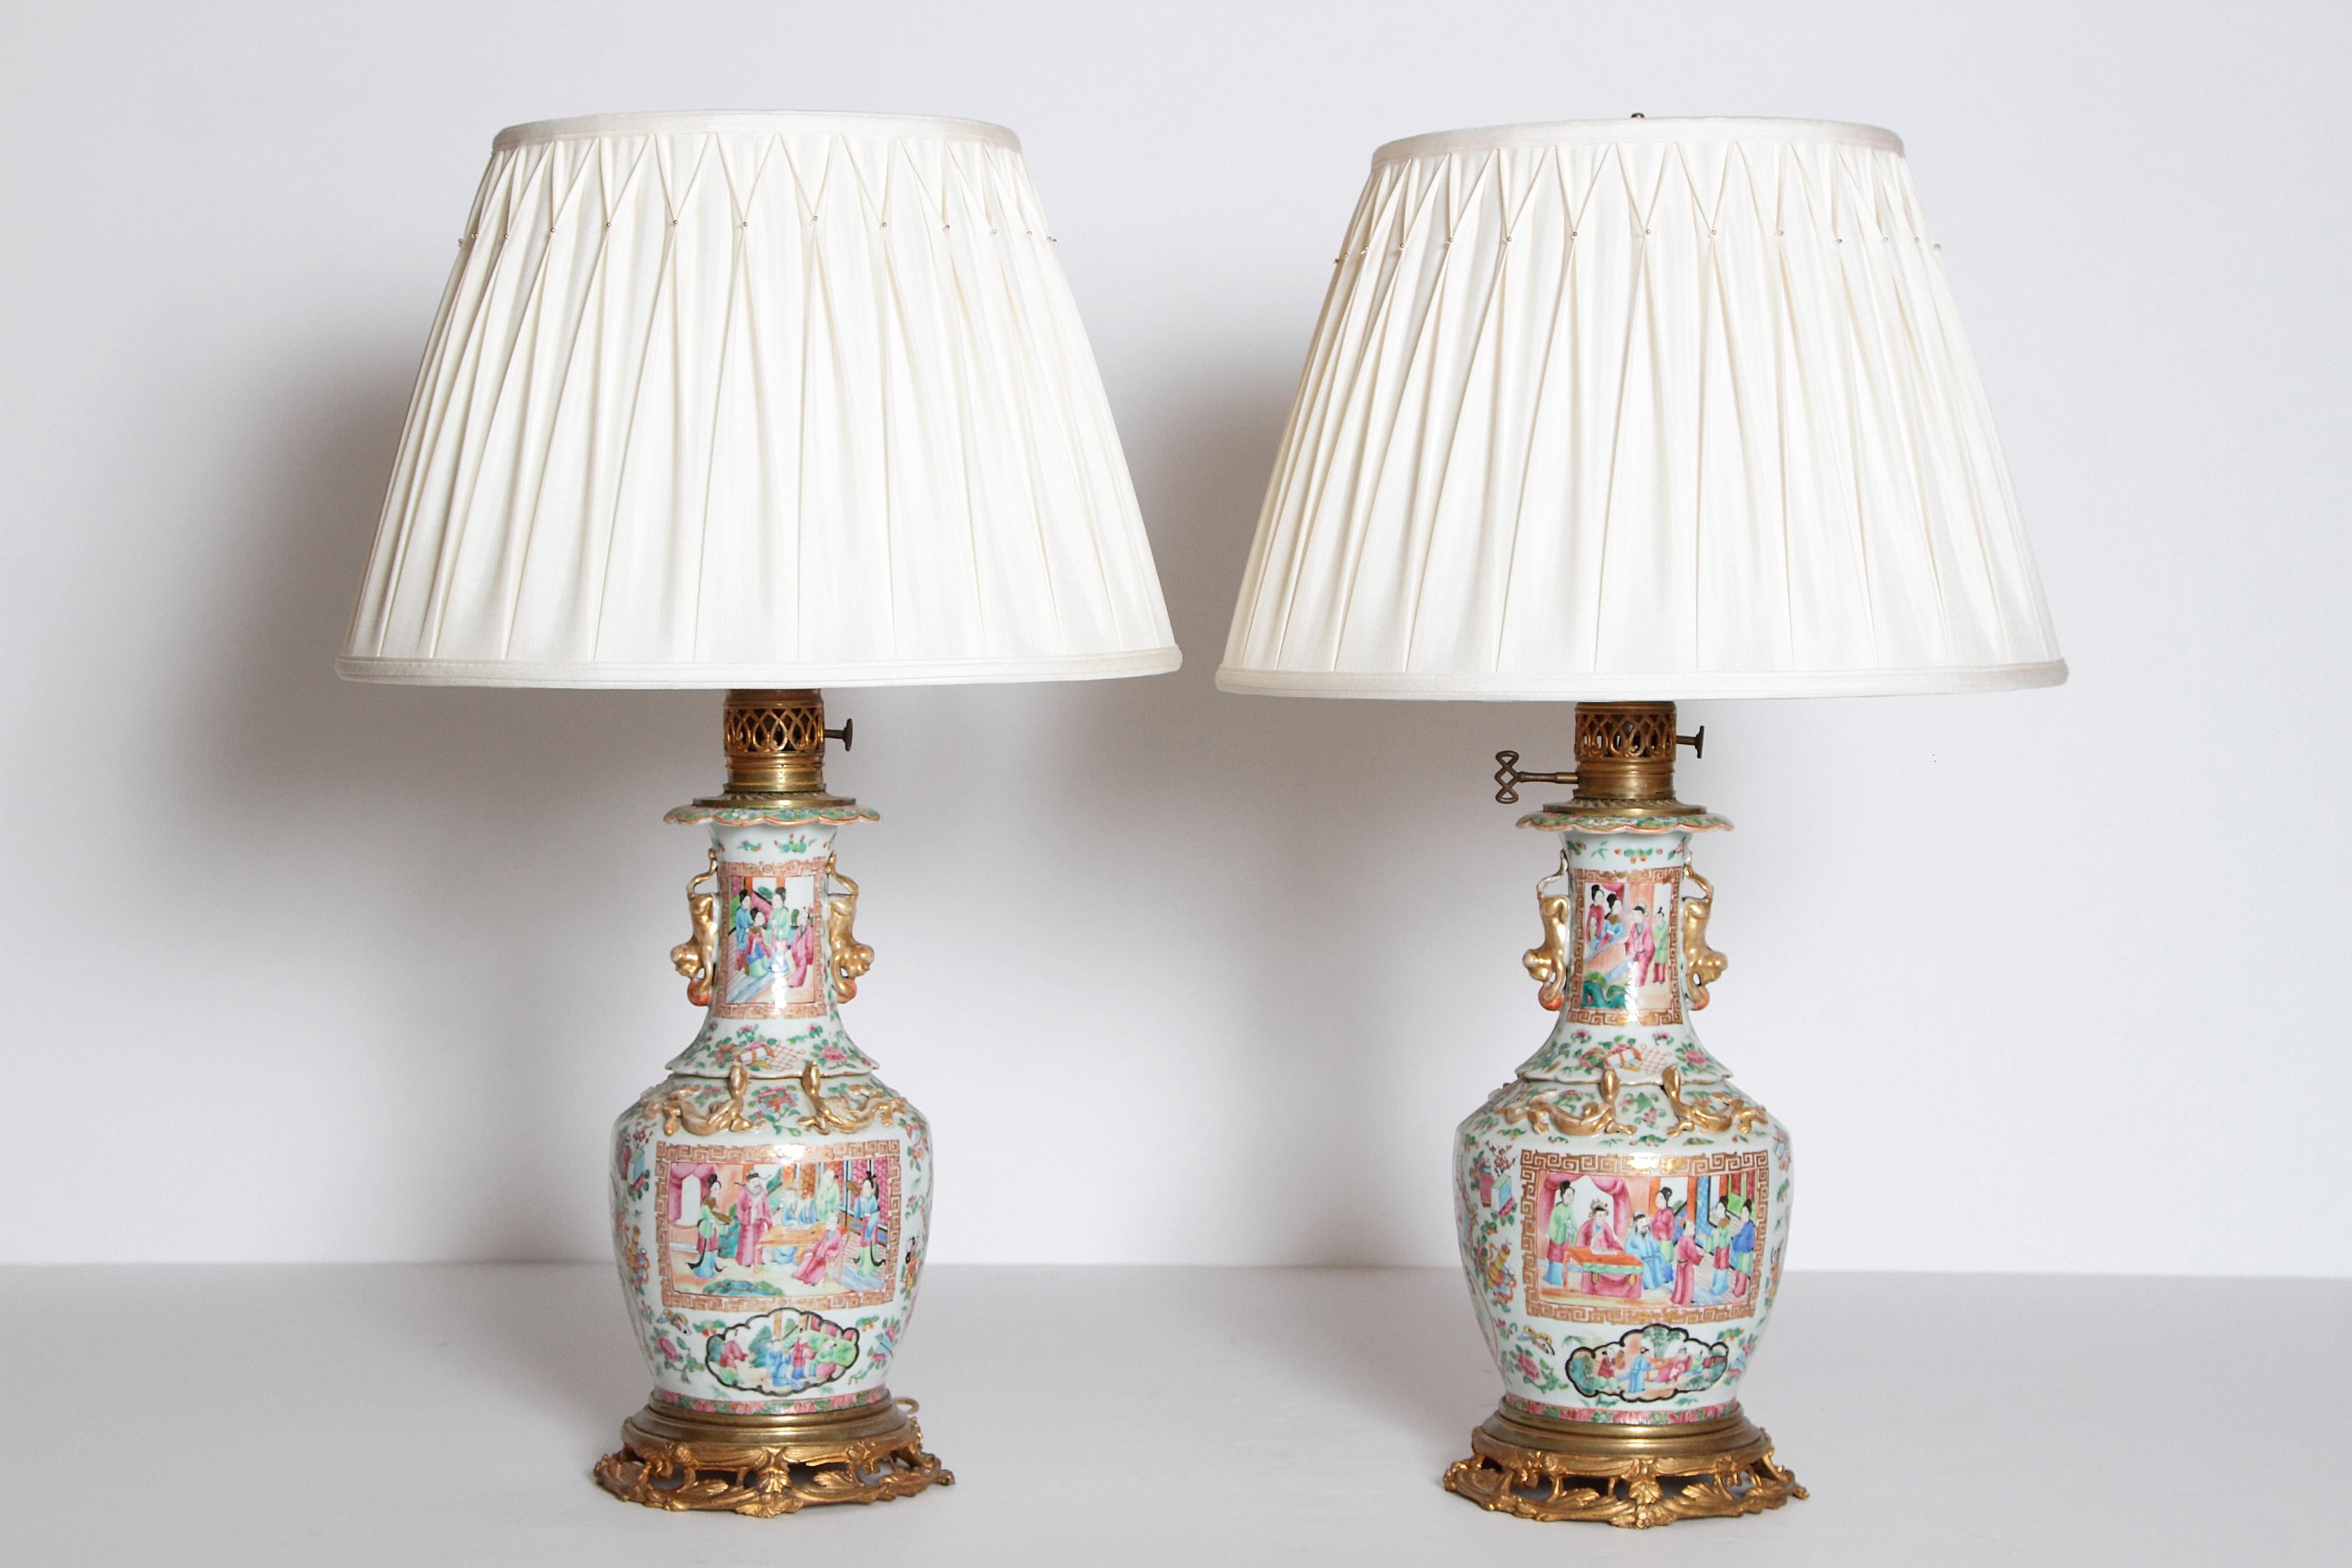 An elegant pair of Chinese rose medallion vases, originally custom mounted as oil lamps, now electrified, set on ormolu bases in foliate design. The bulbous shape of the vase contains two large panels of people bordered in a fret key motif and four